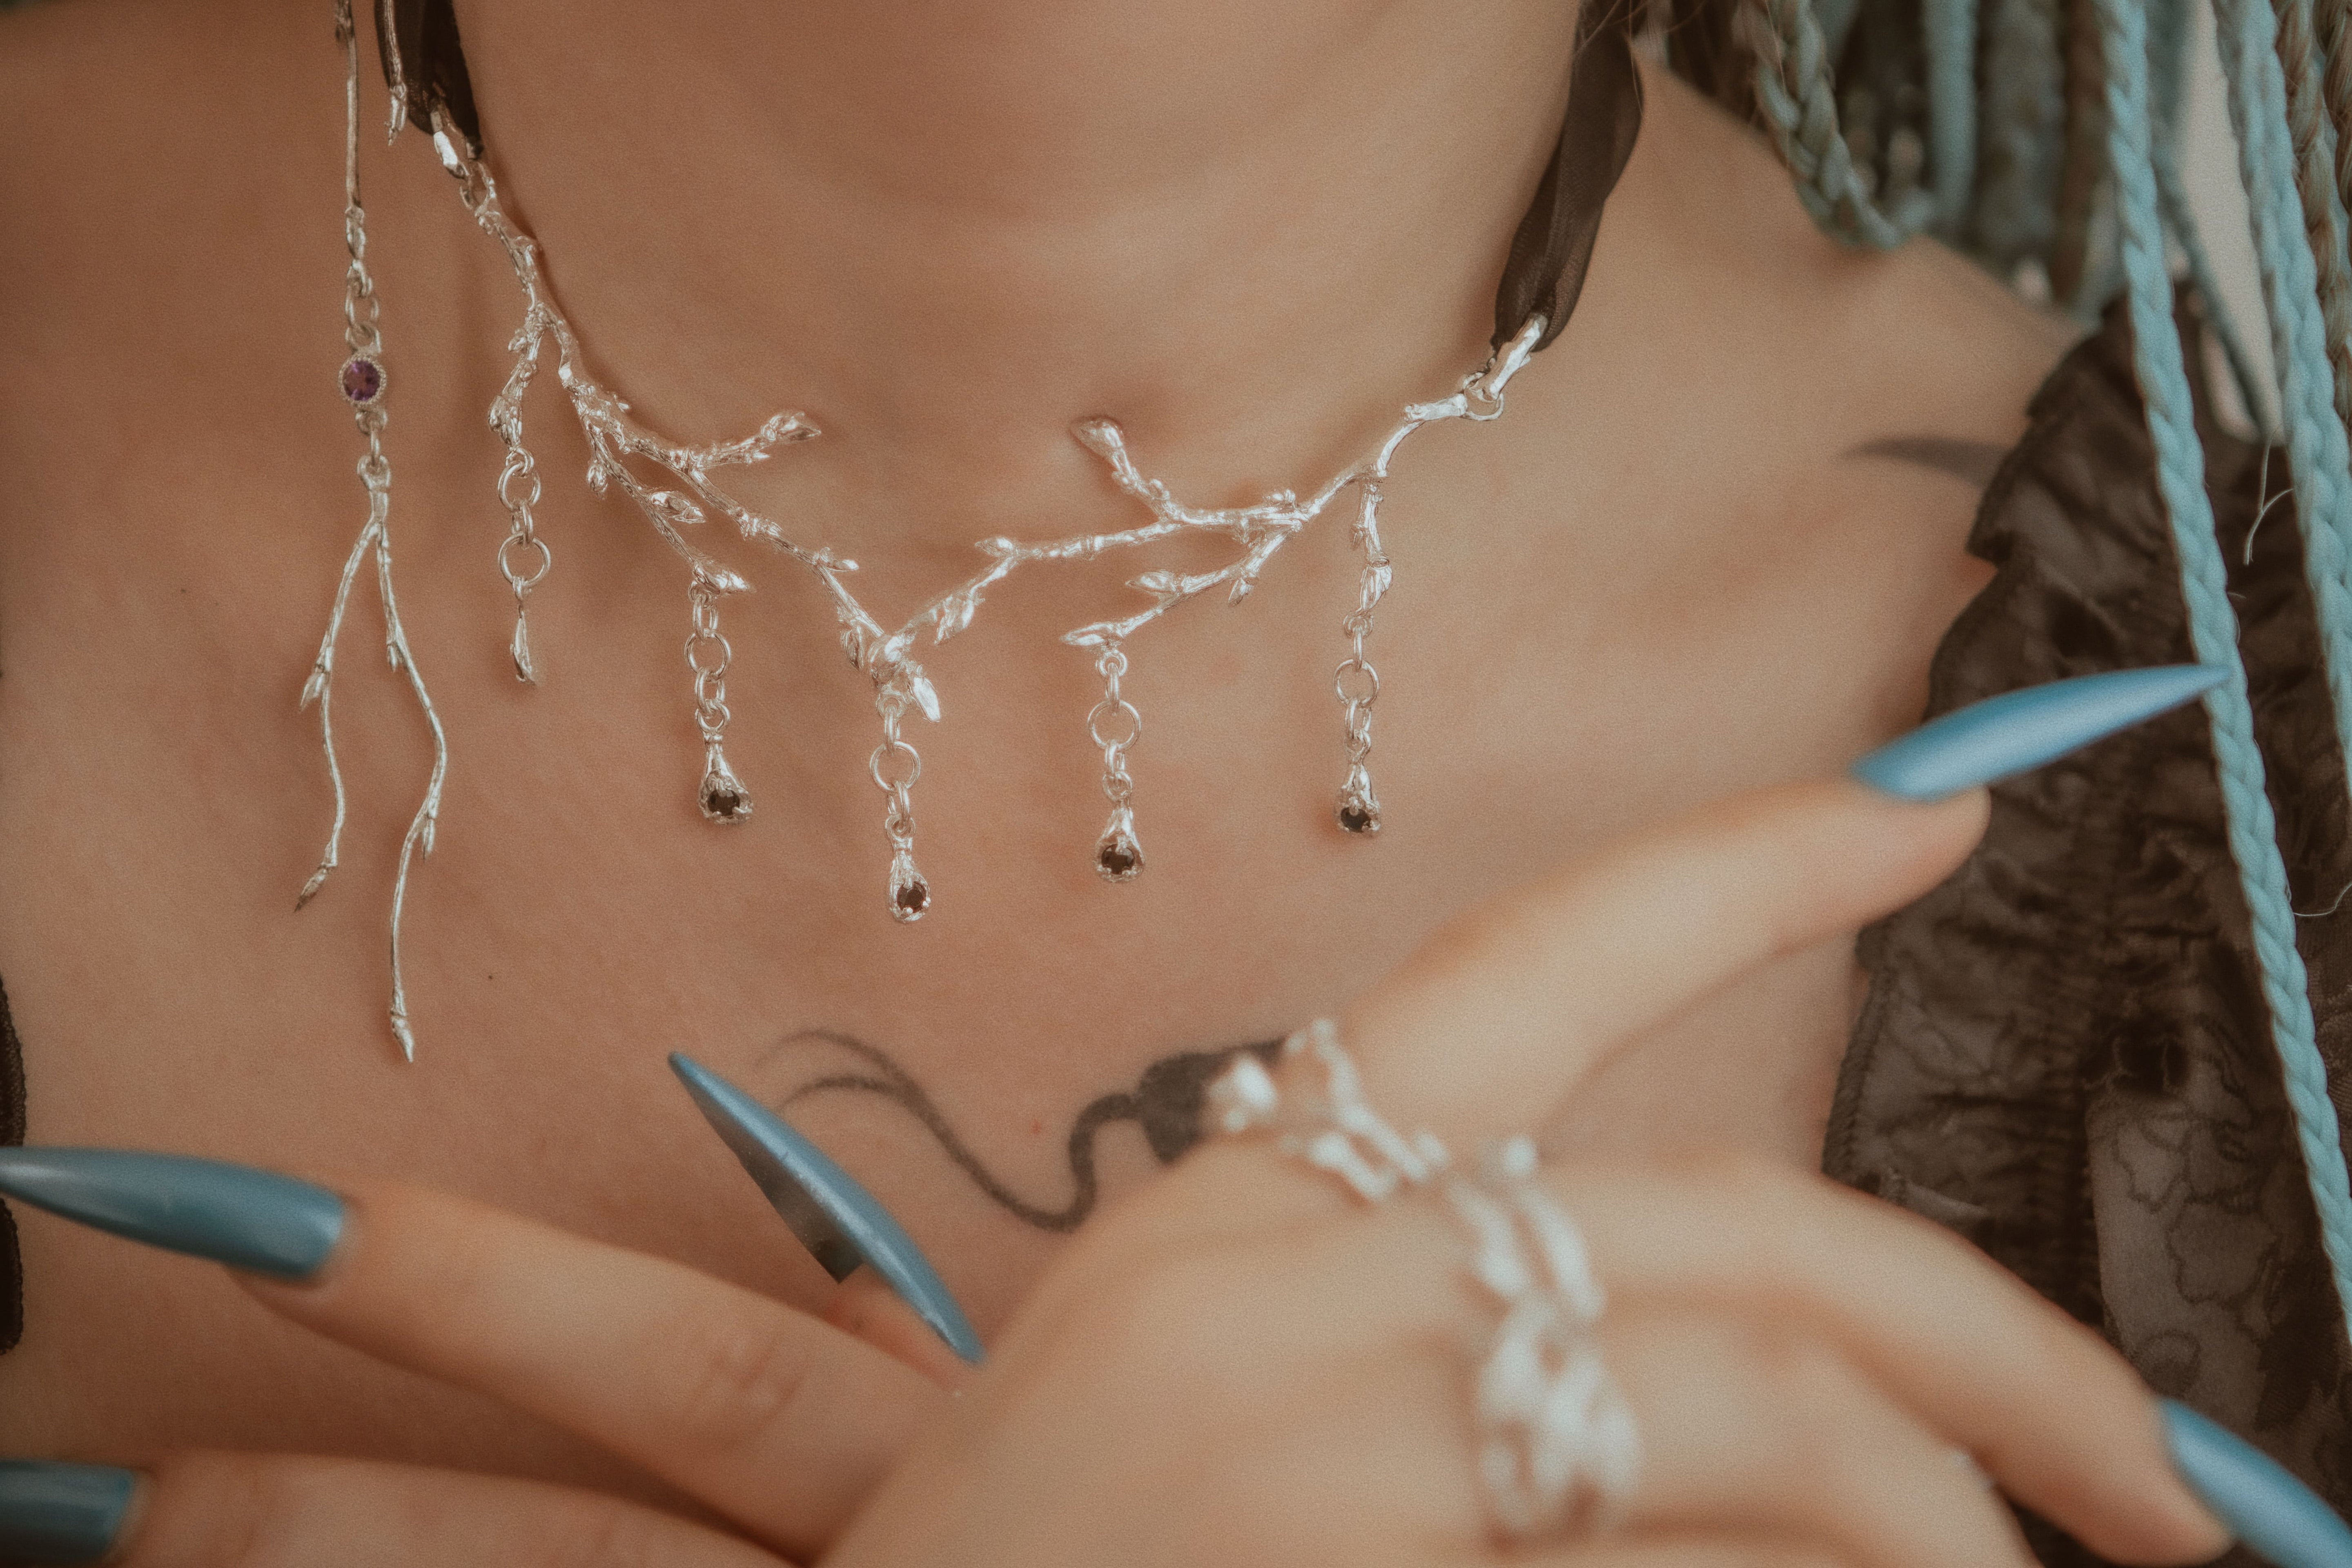 Necklace made of silver forest branches and stones